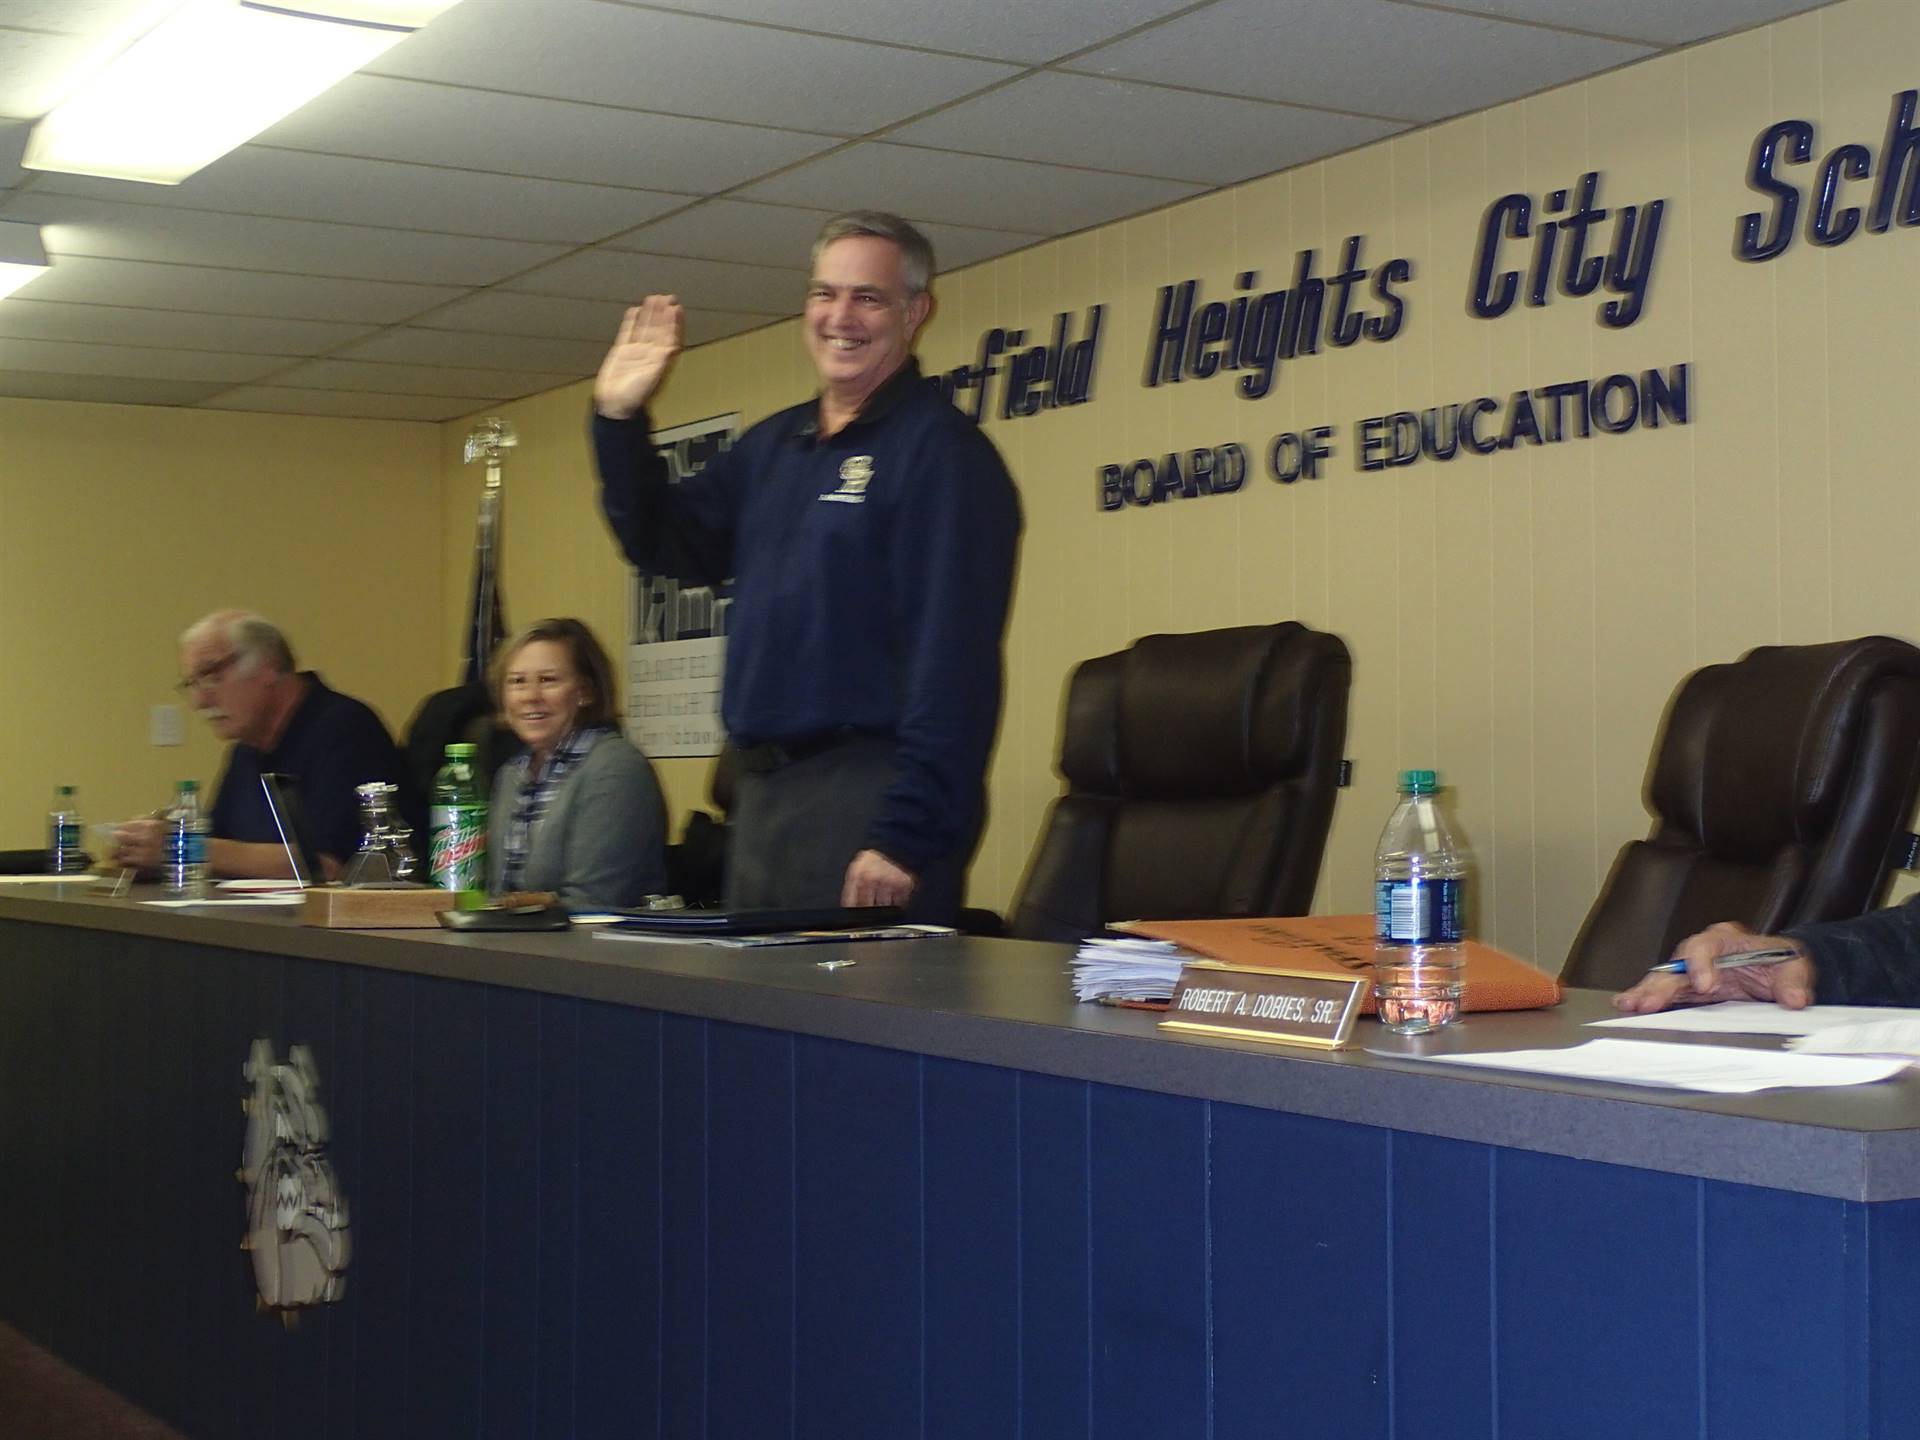 Gary Wolkse during the swearing in ceremony for the board of education